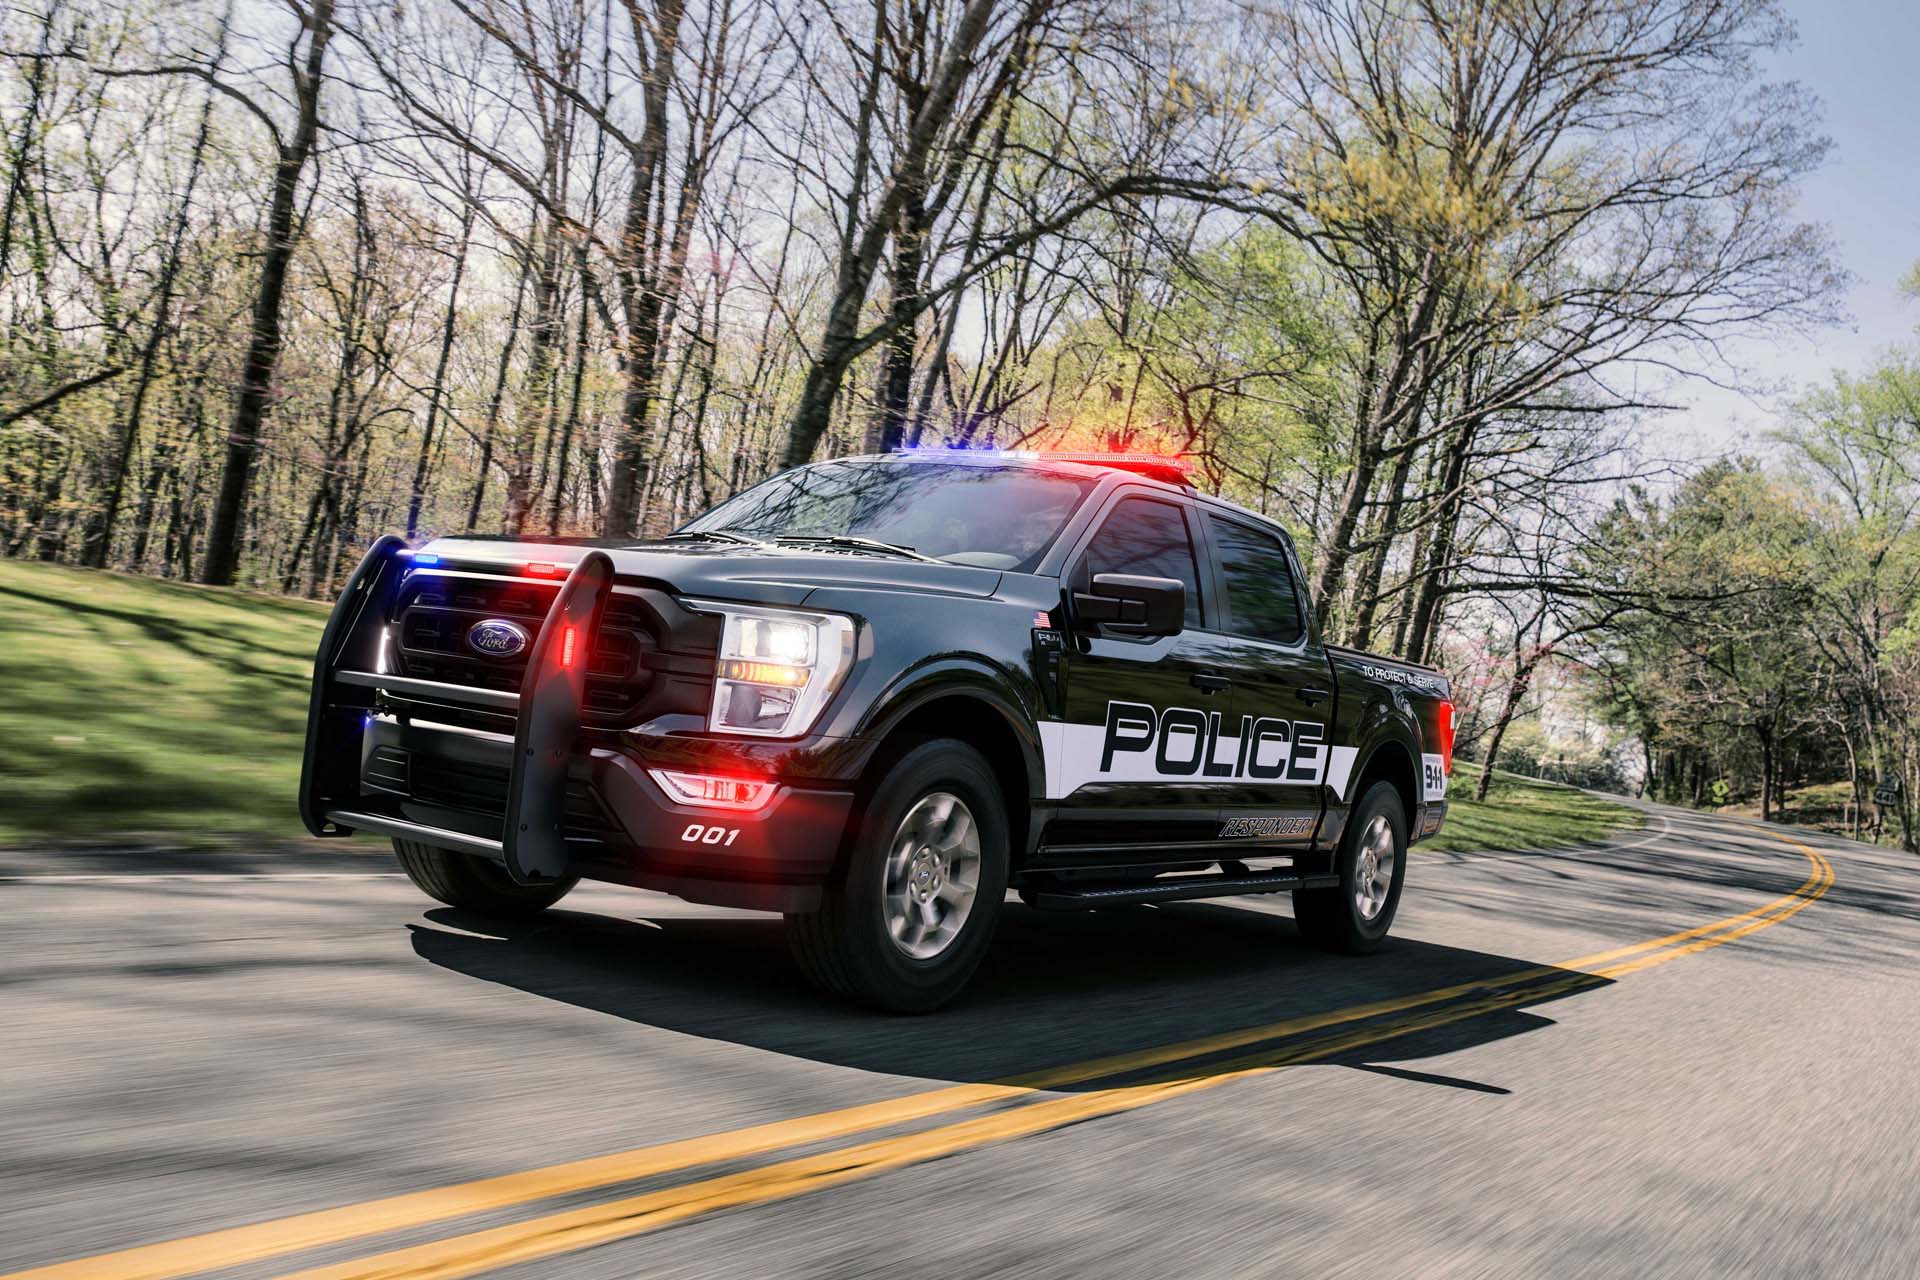 The 2021 Ford F-150 Police Responder racing down the road with its lights on